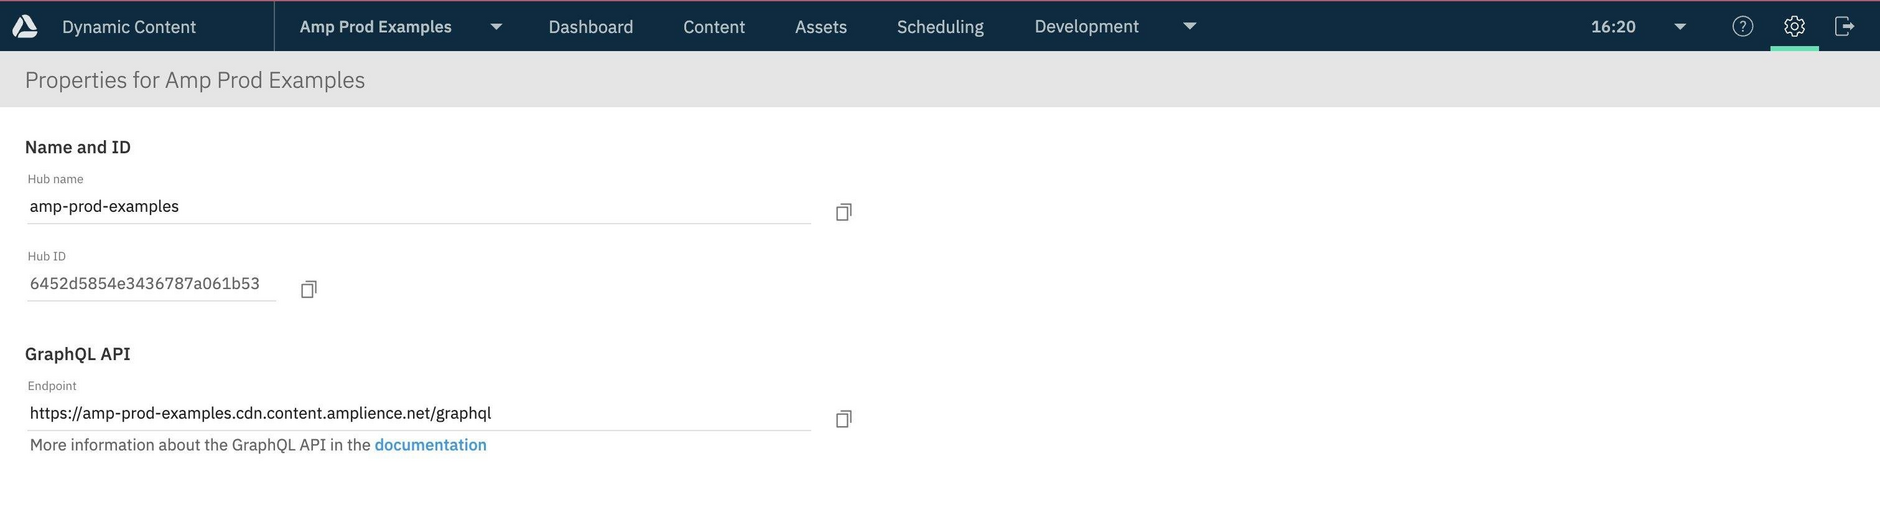 The properties tab can be found in the settings of your Dynamic Content dashboard.